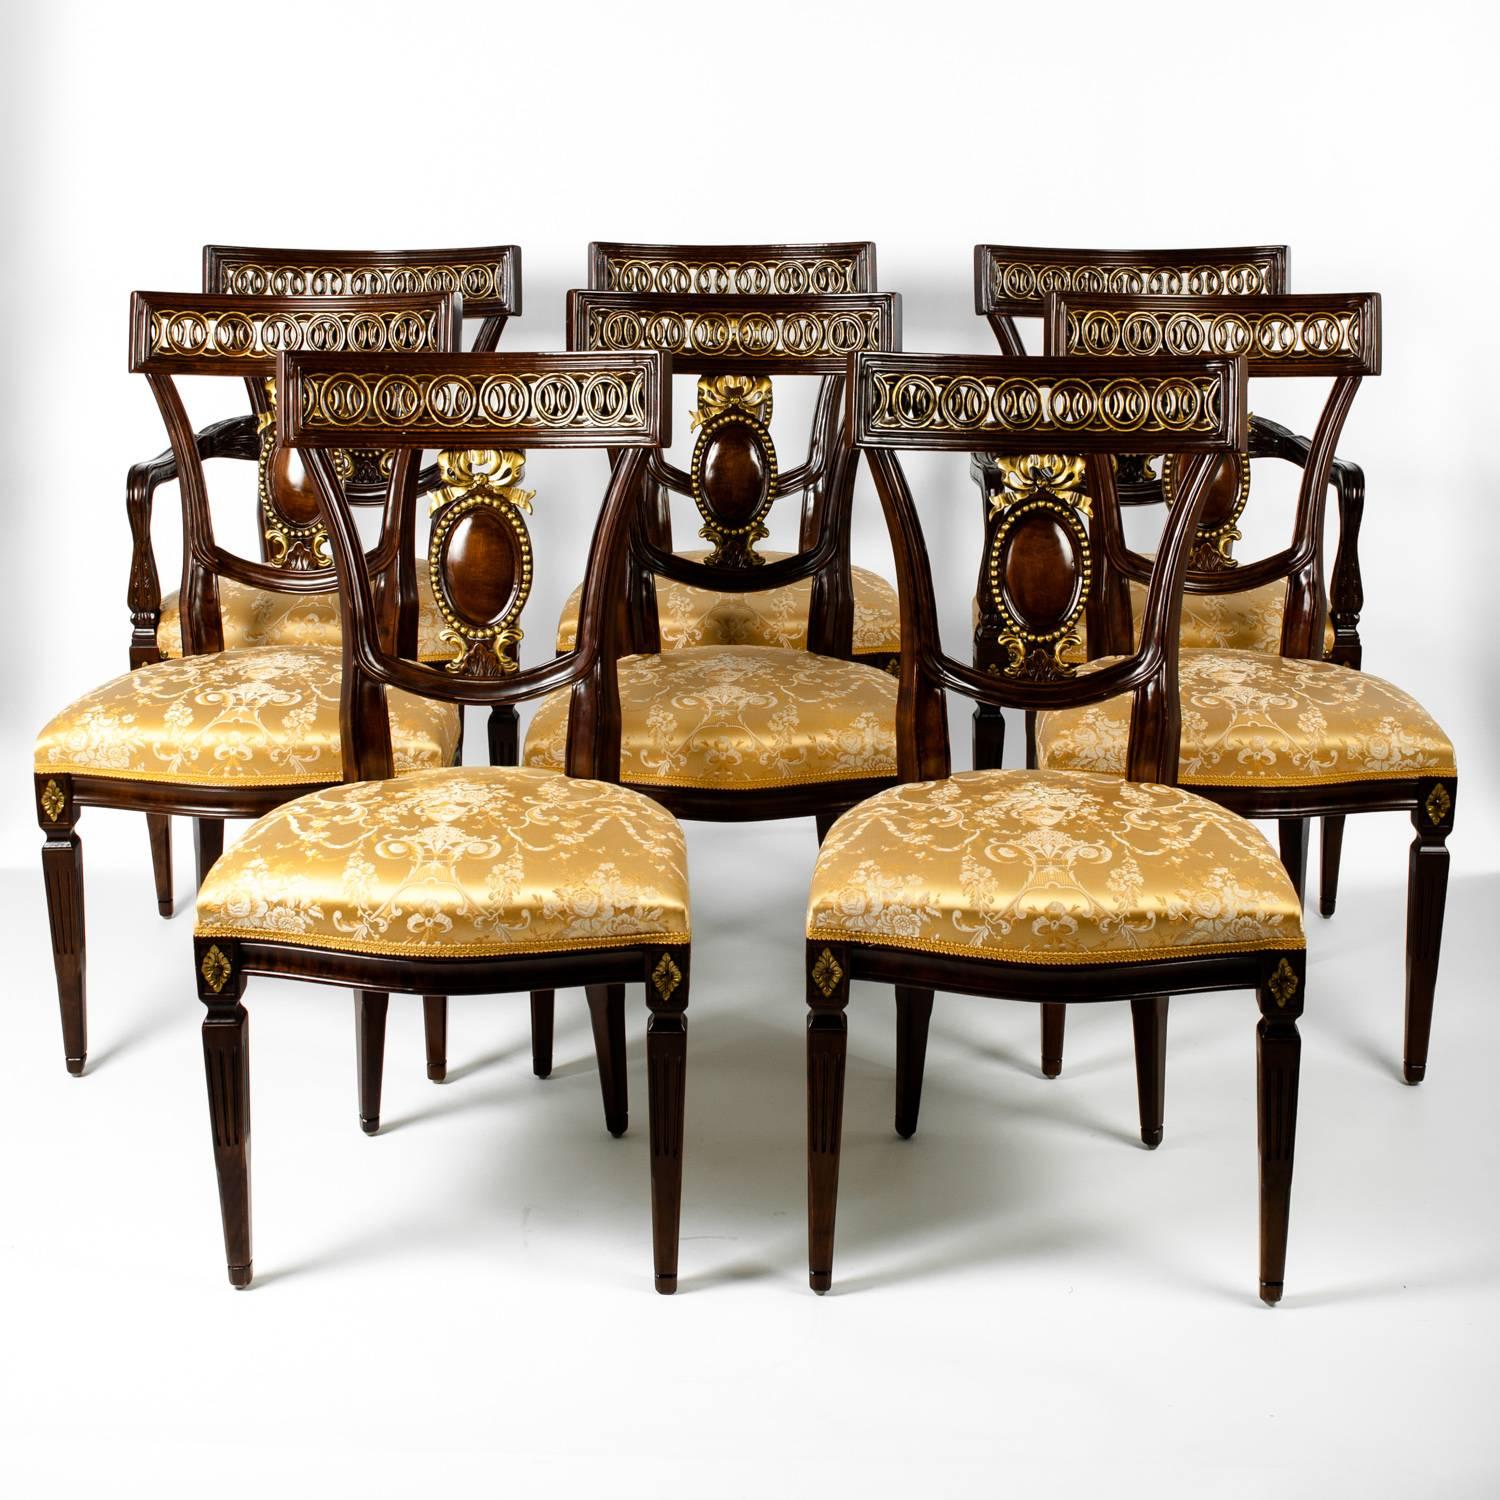 A vintage set of eight European mahogany wood dining chairs. Six side chairs and two armchairs. Excellent condition. Each dining chair measure 35 inches high x 19 inches length x 17 inches width.